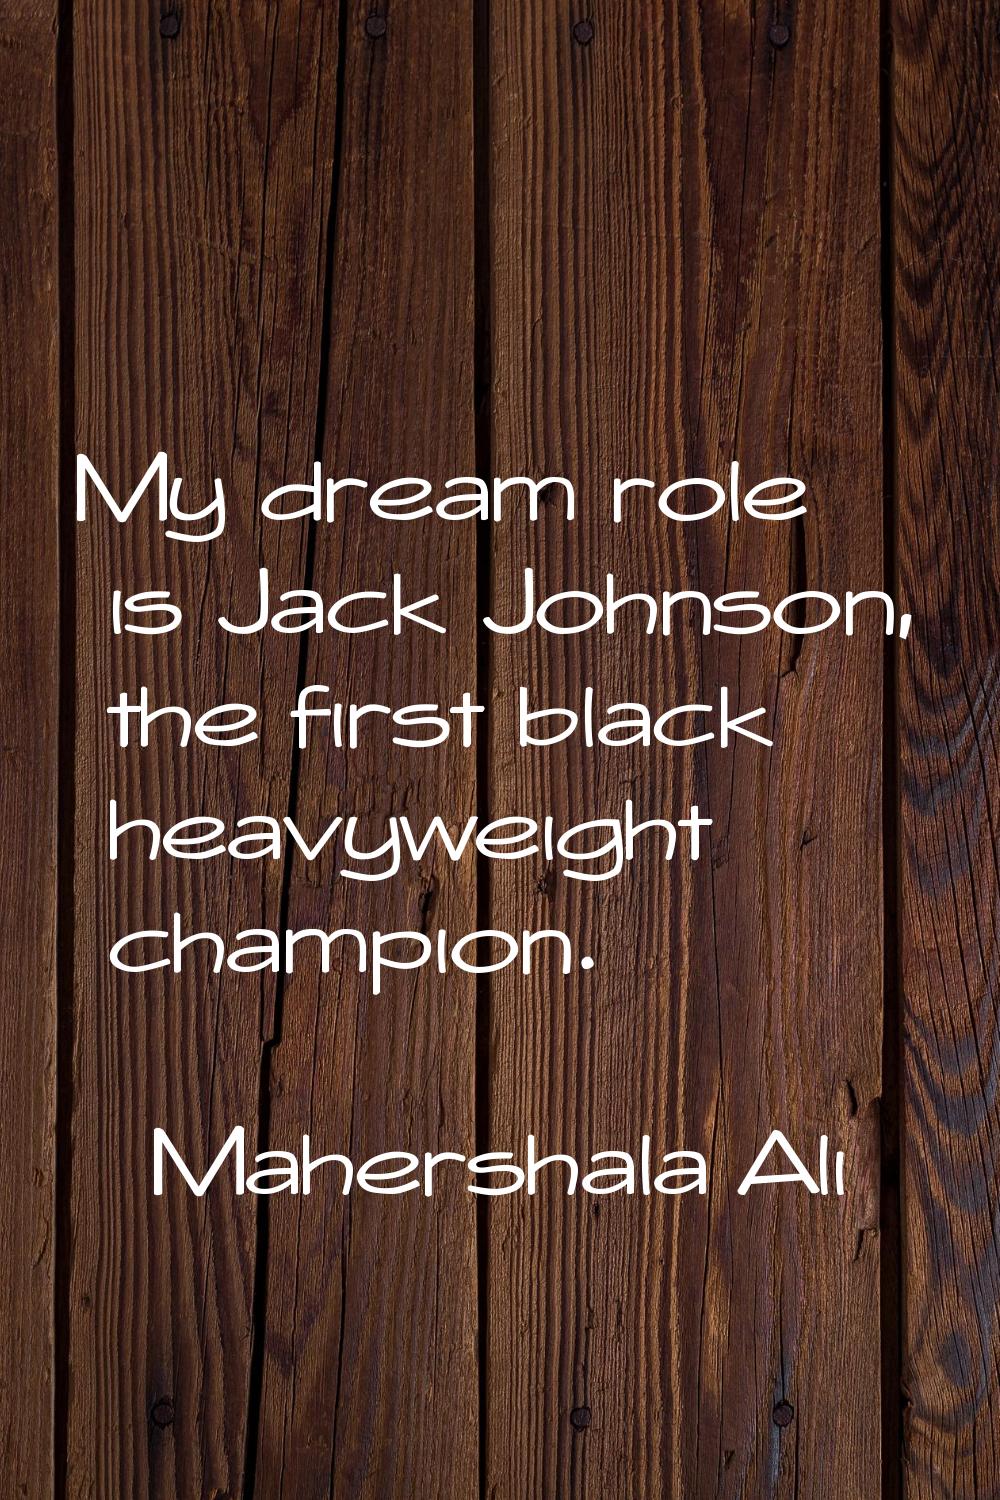 My dream role is Jack Johnson, the first black heavyweight champion.